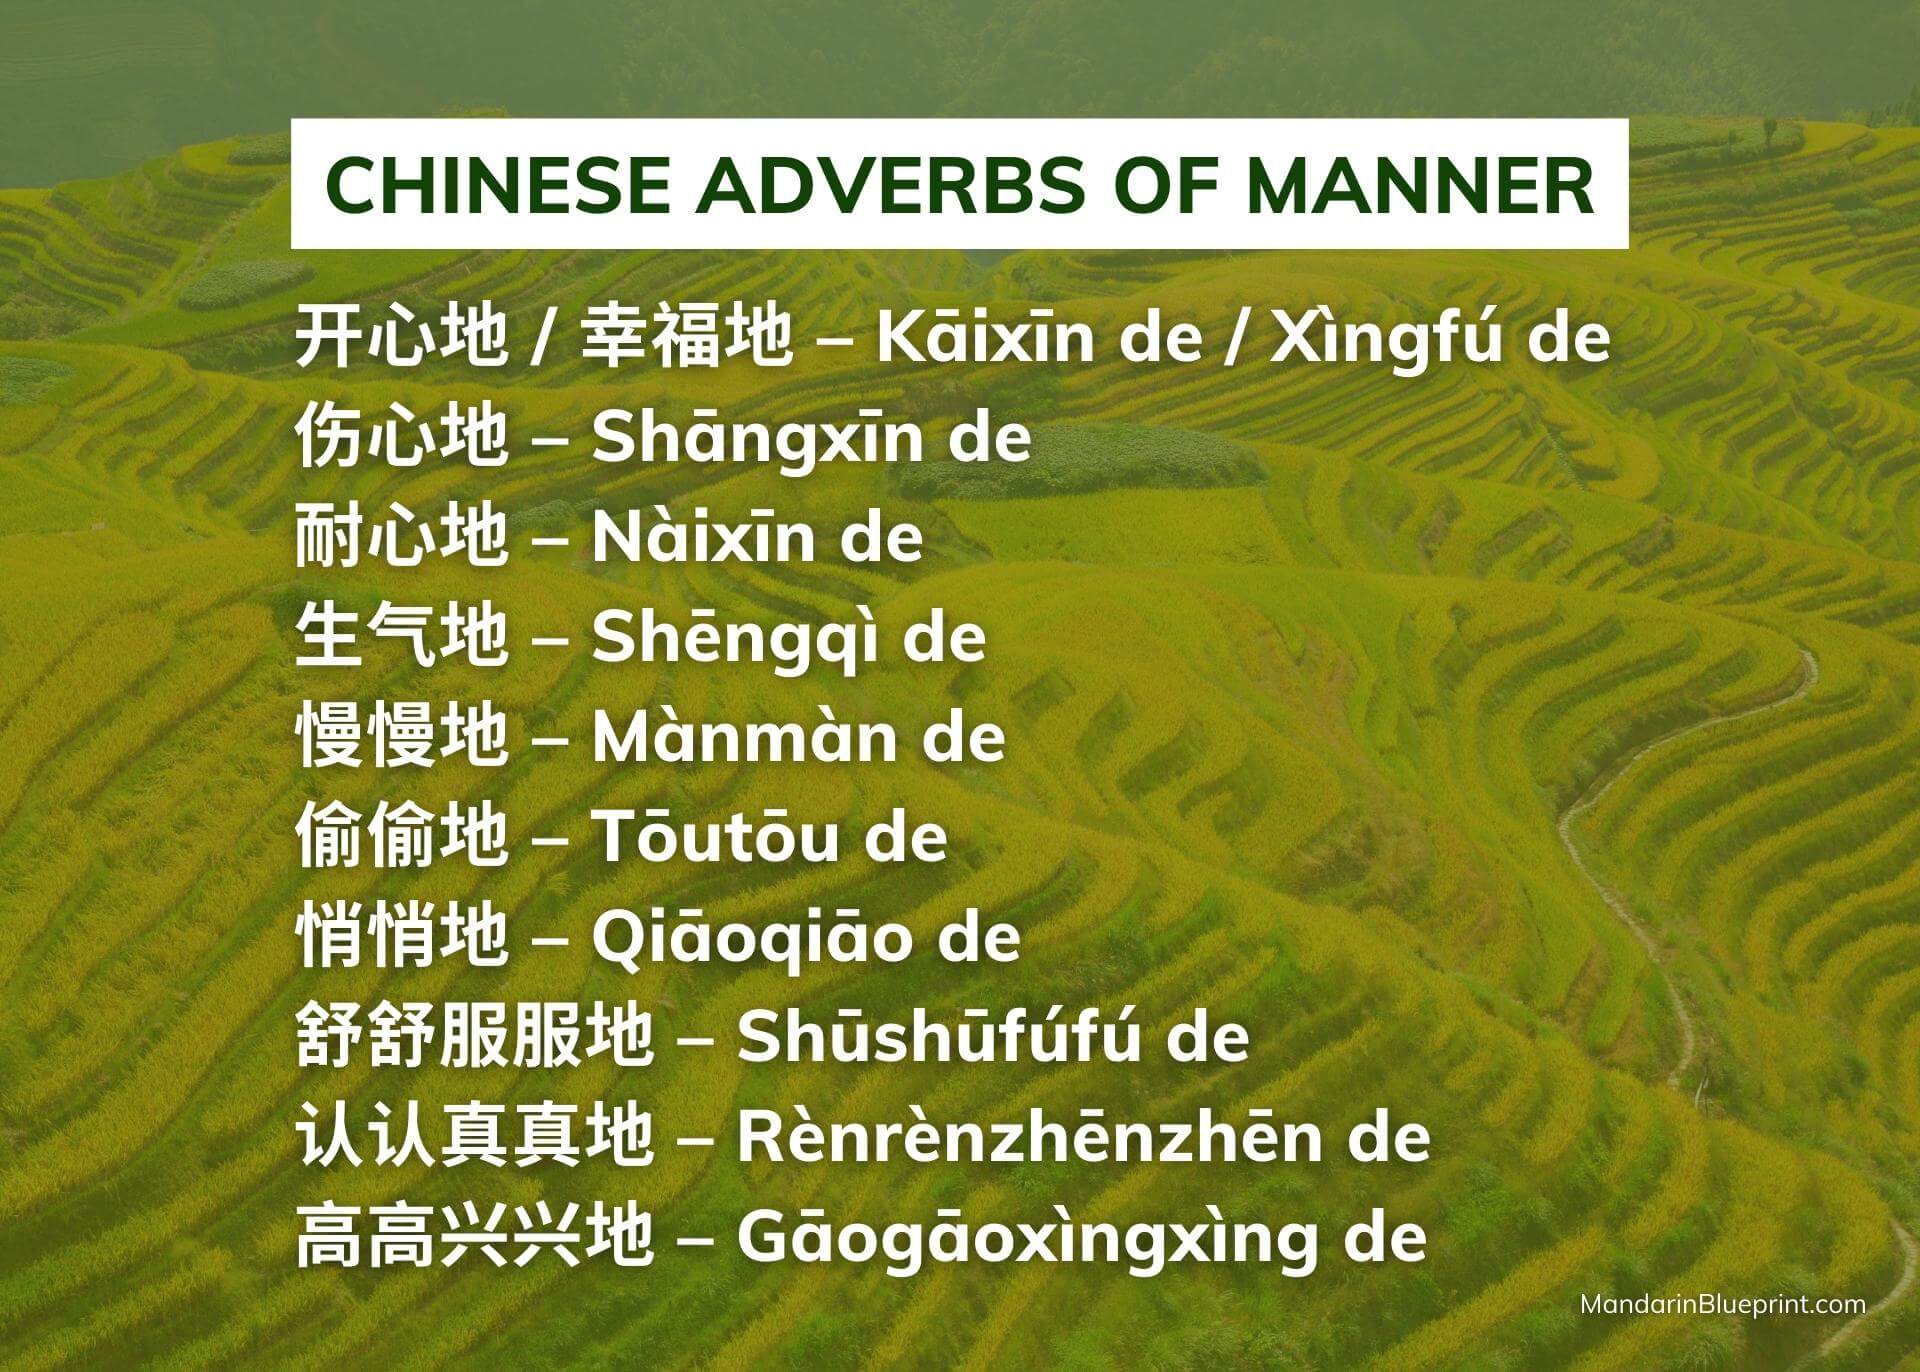 Chinese adverbs of manner